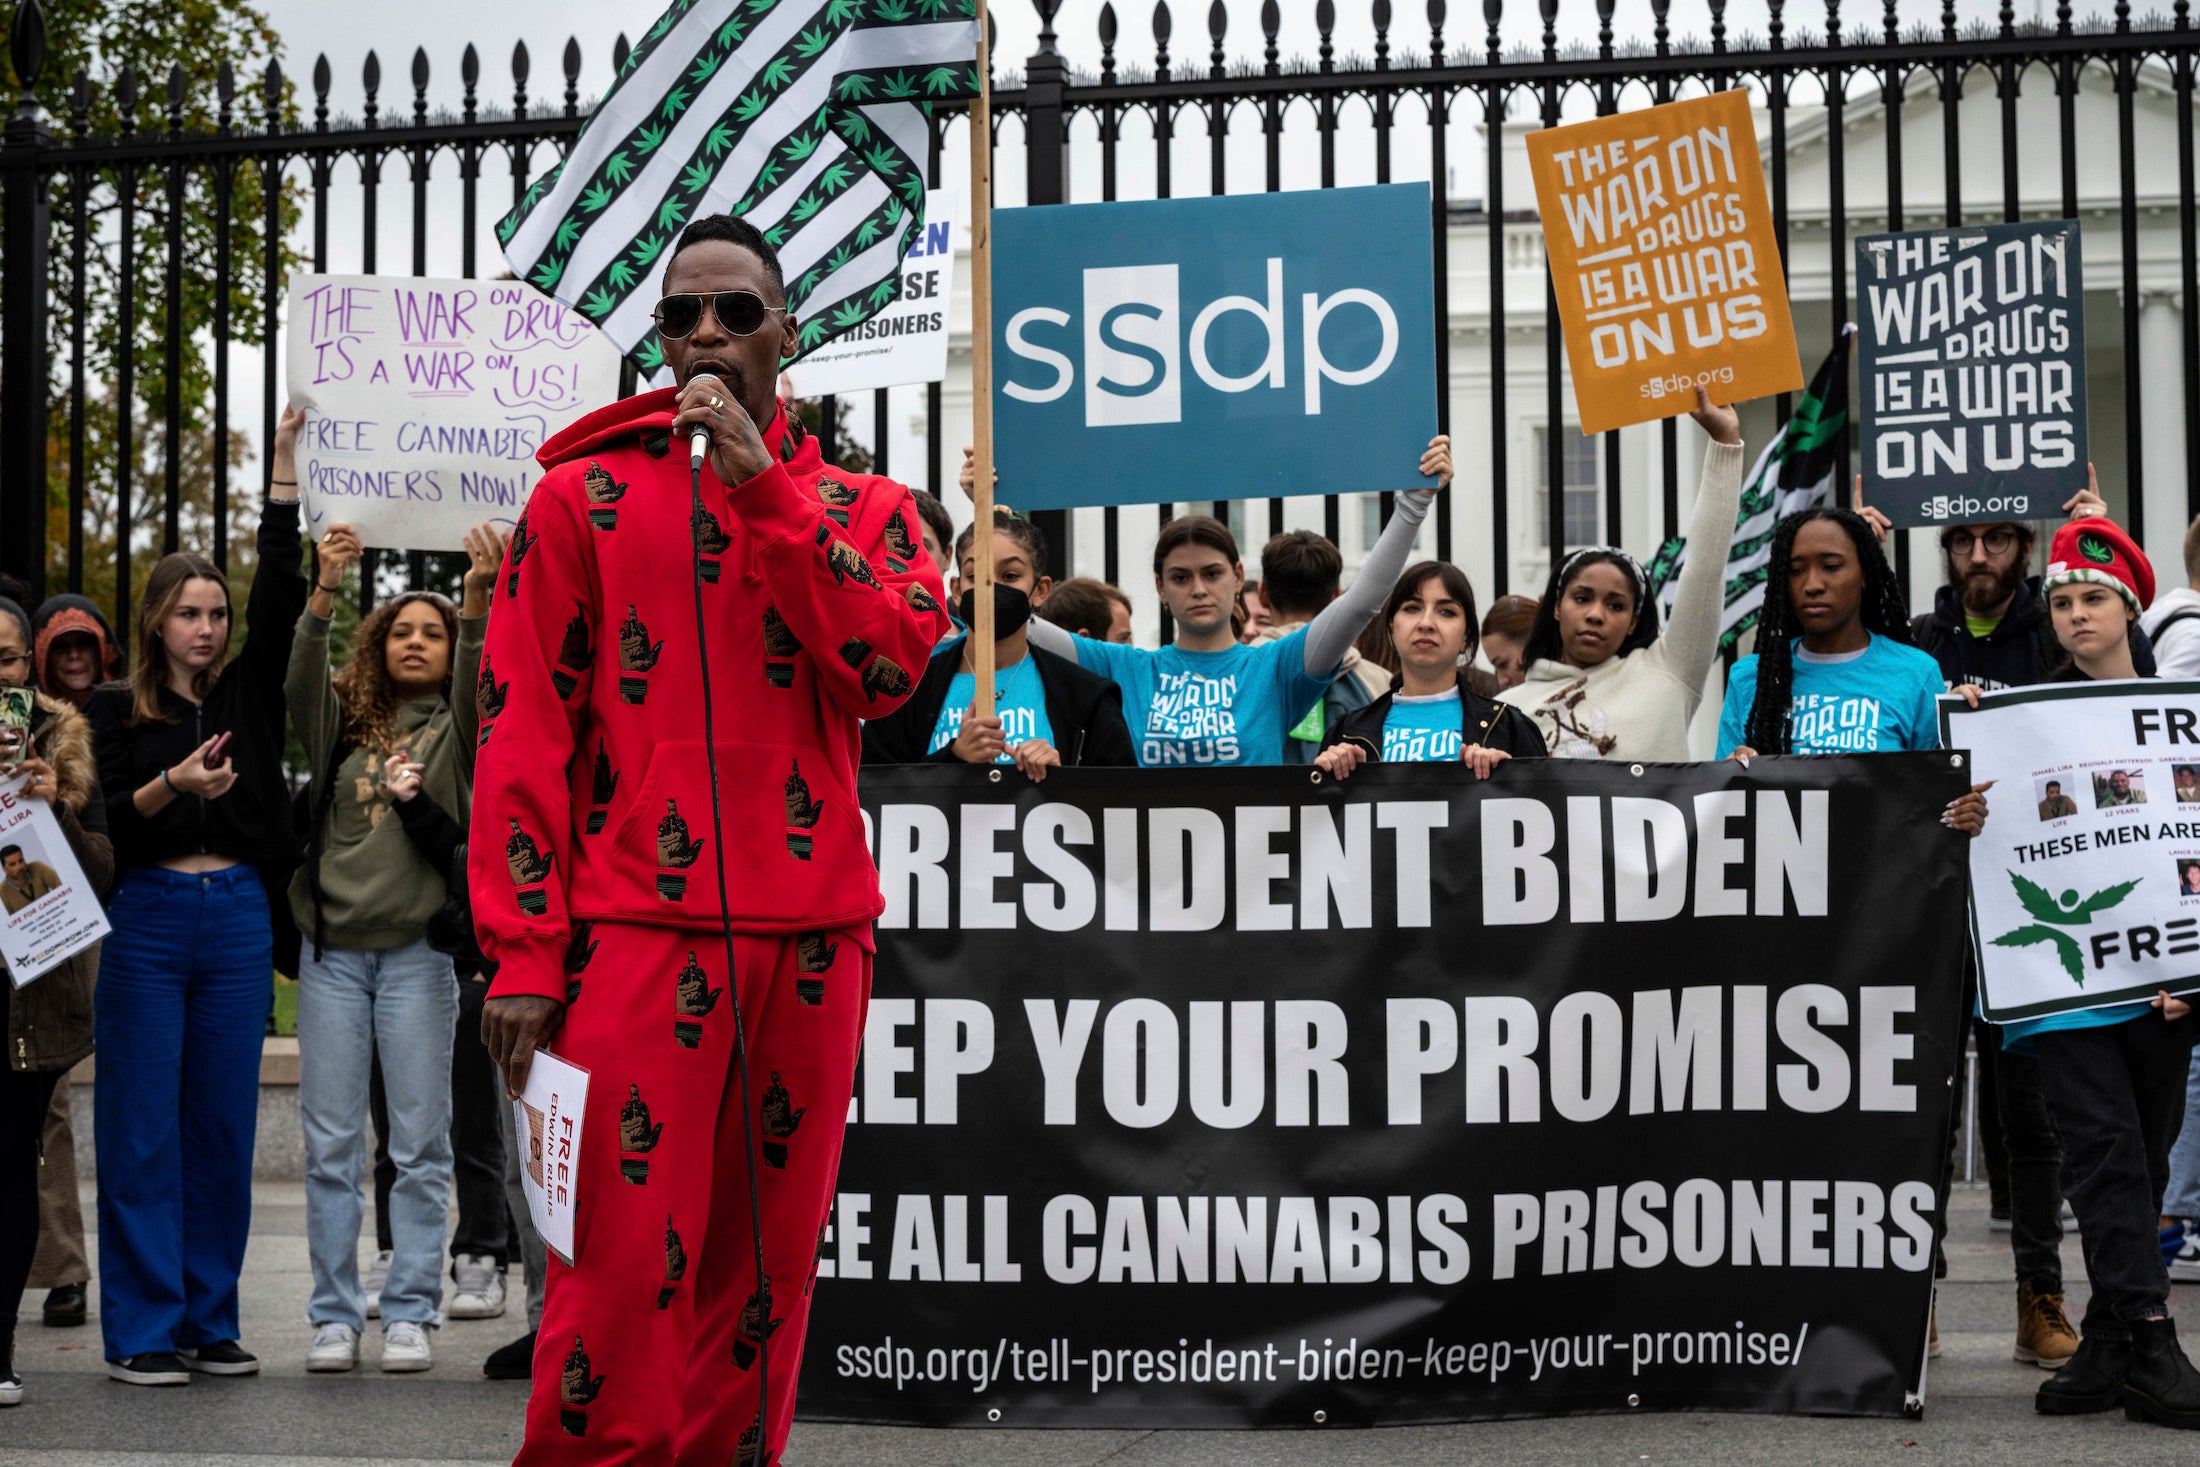 Rapper M-1speaks at a protest for cannabis reform outside the White House in Washington, D.C.